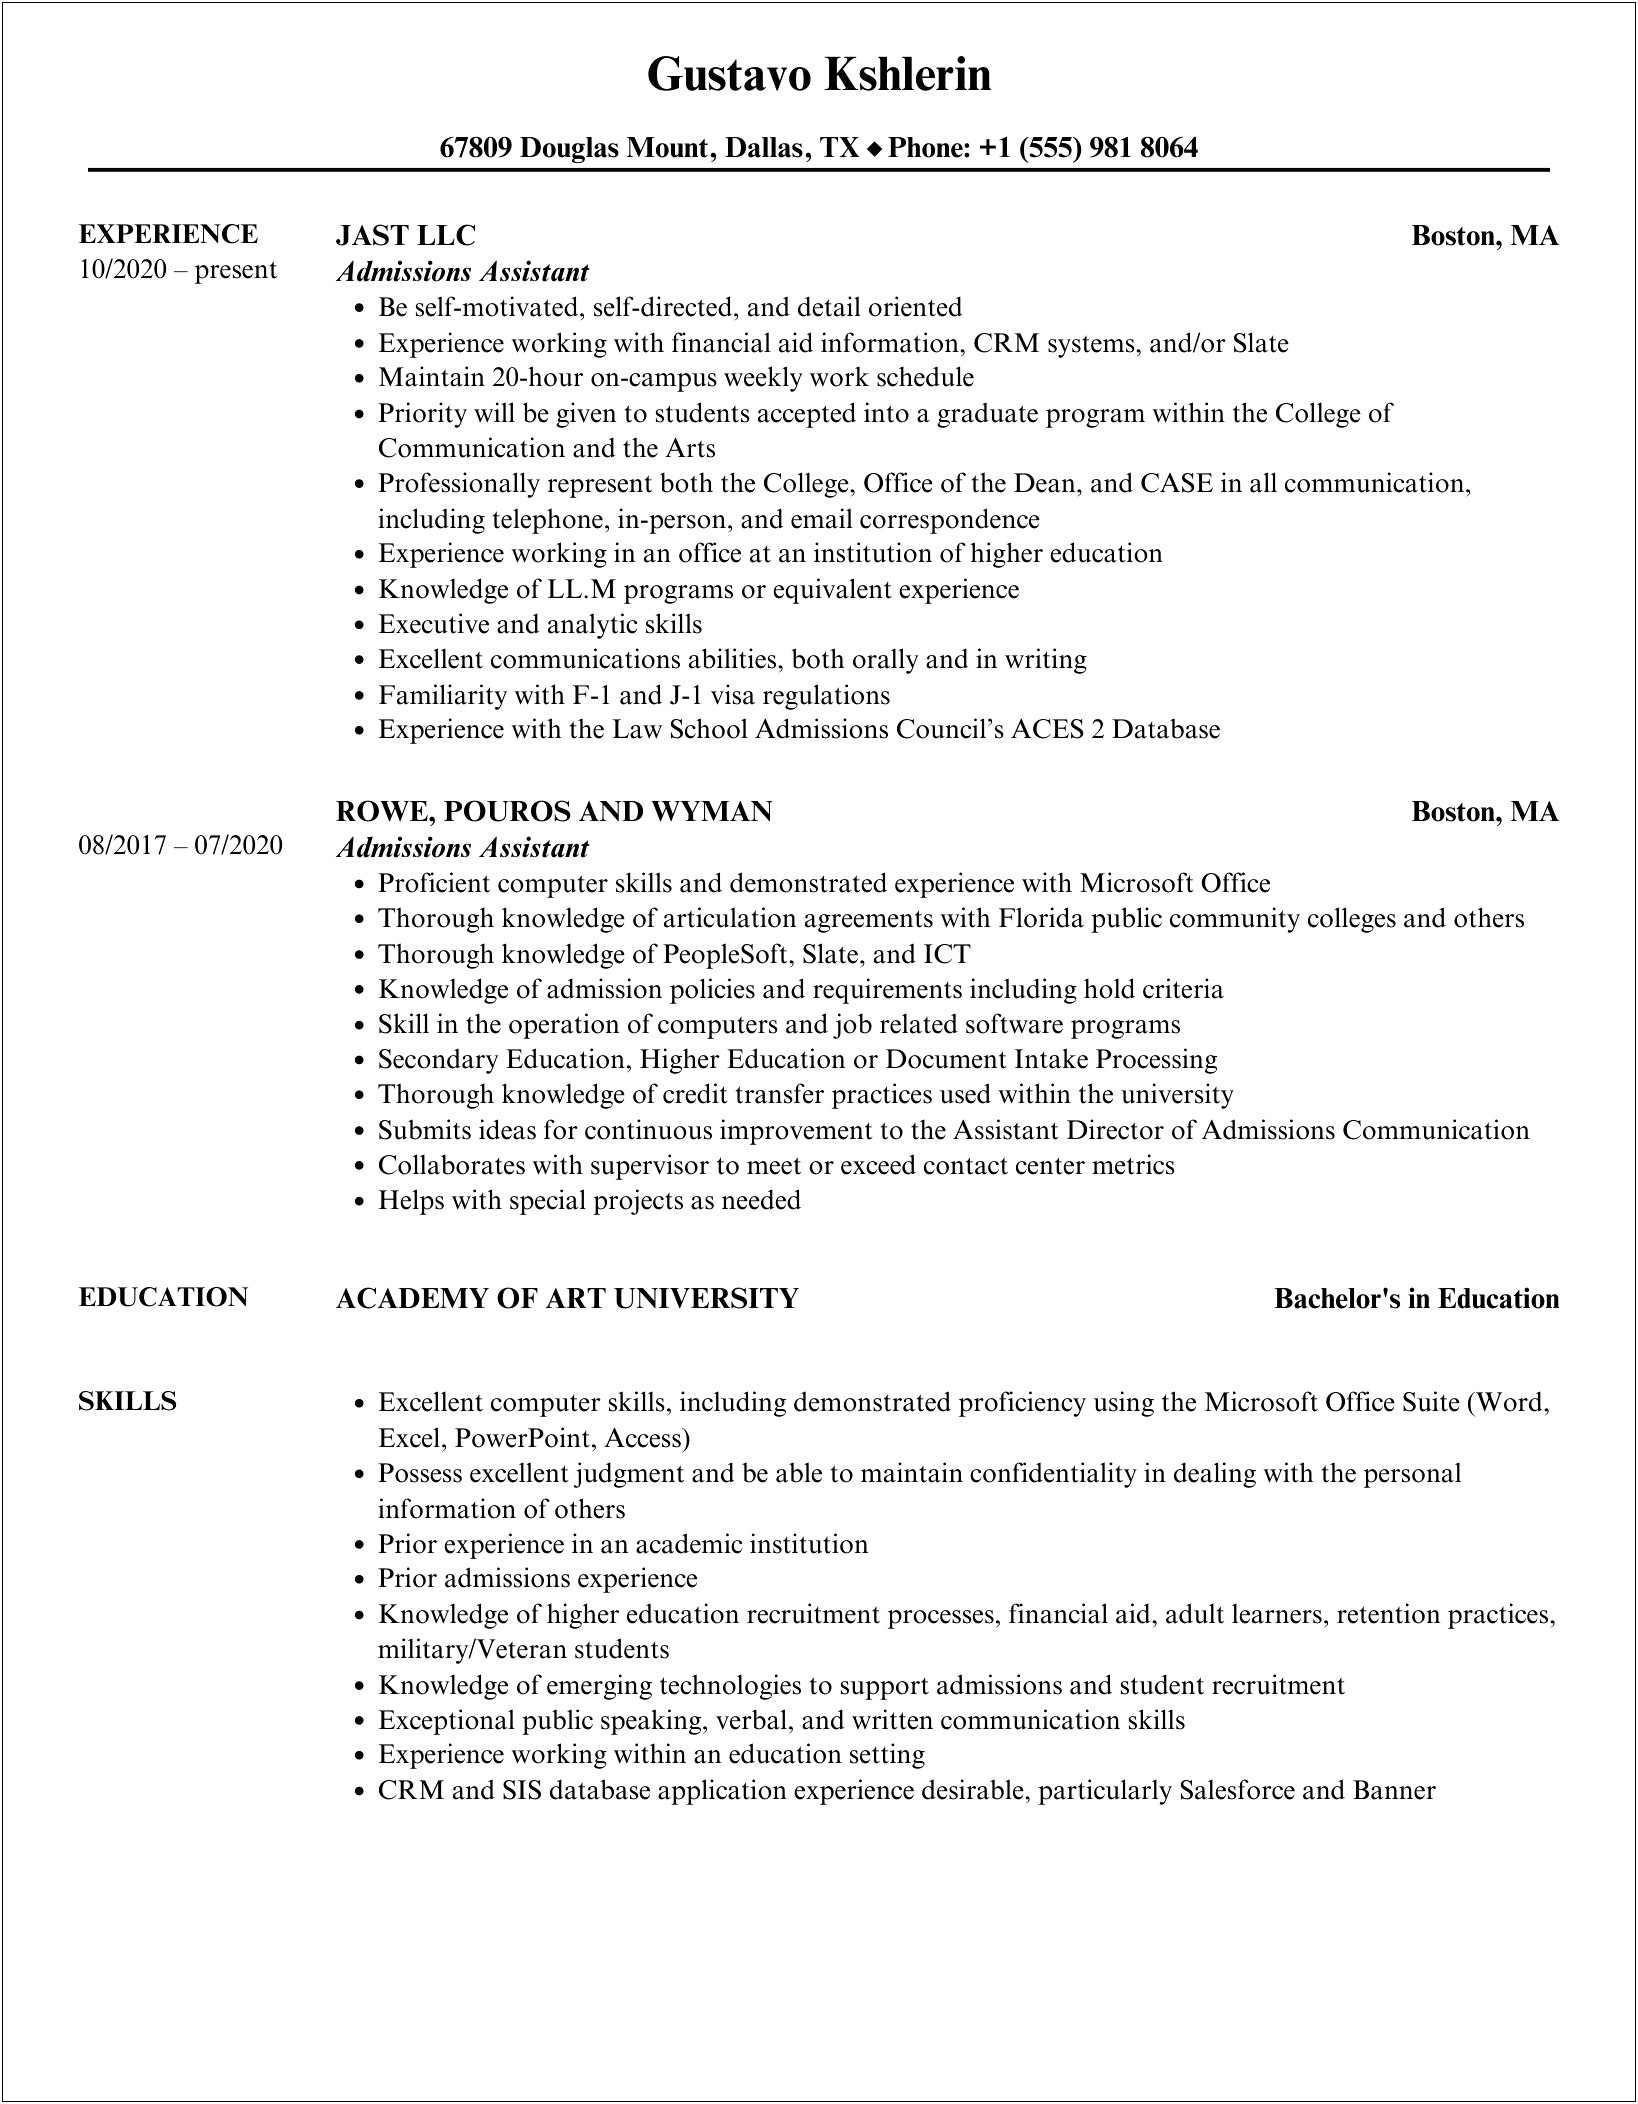 Resume Summary Of A Admissions Assistant